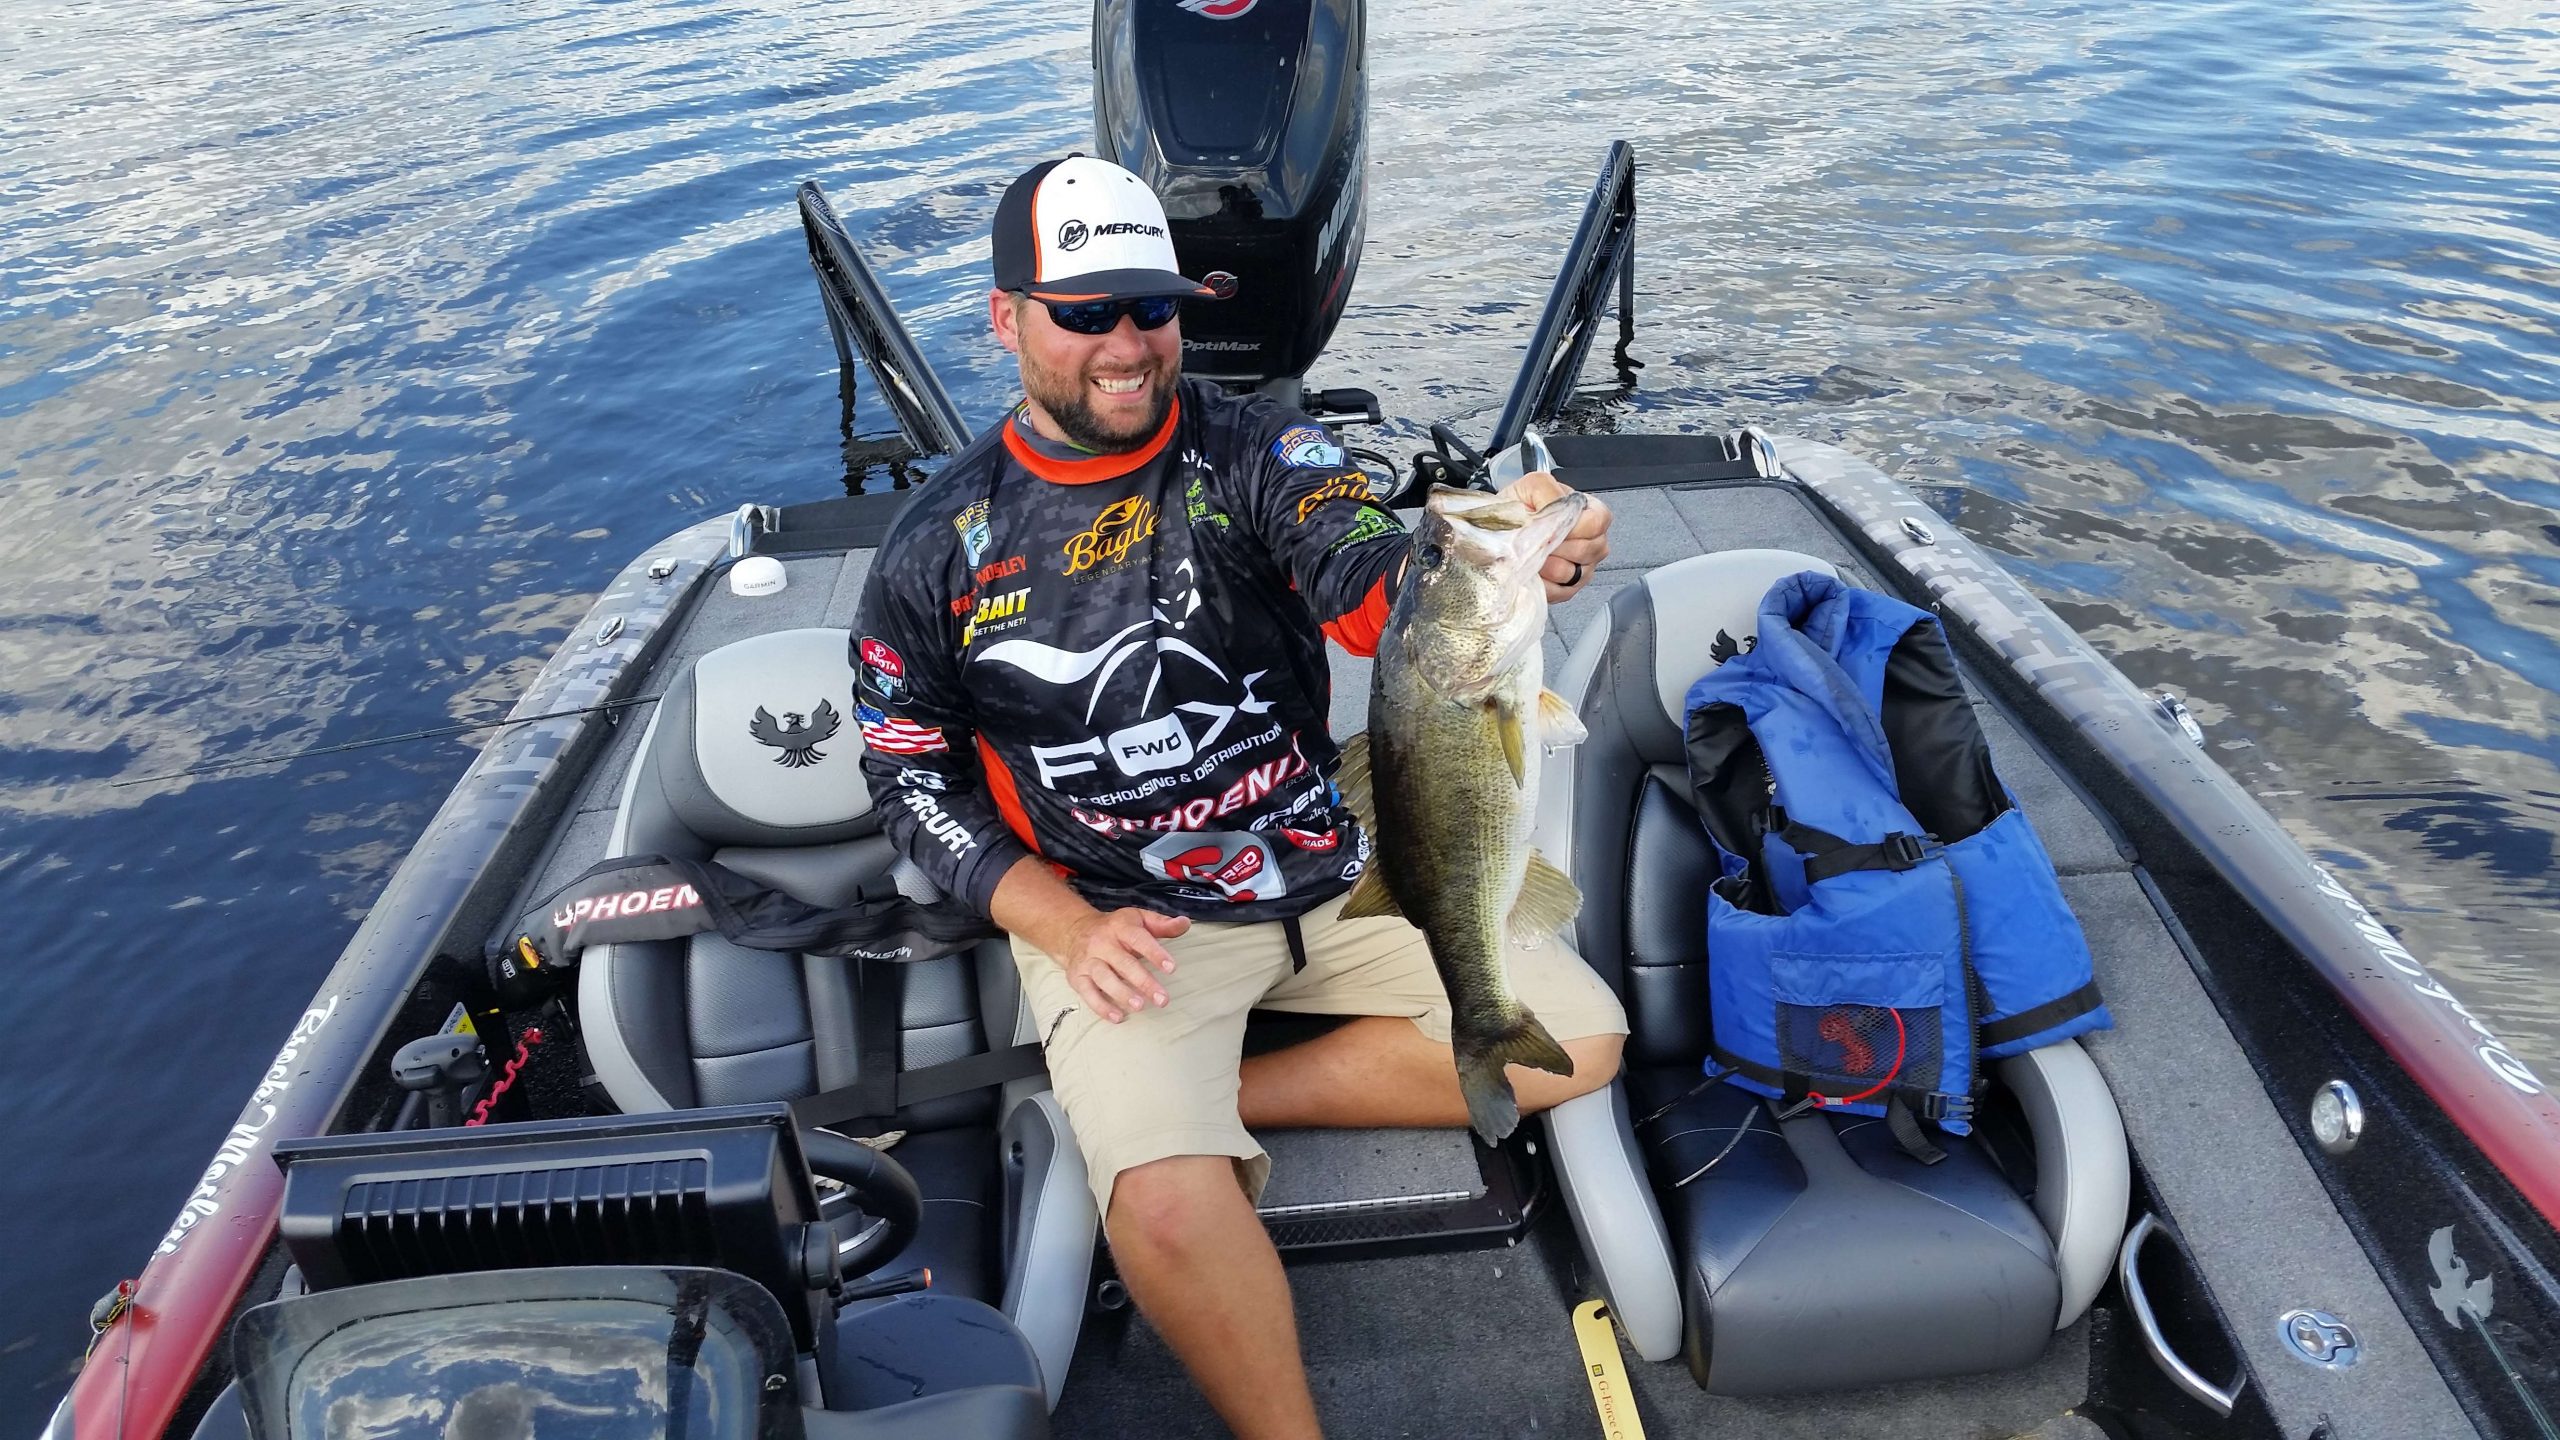 Brock with a 4 1/2-pounder. Good cull to round out Day 3 on Lake Okeechobee. 